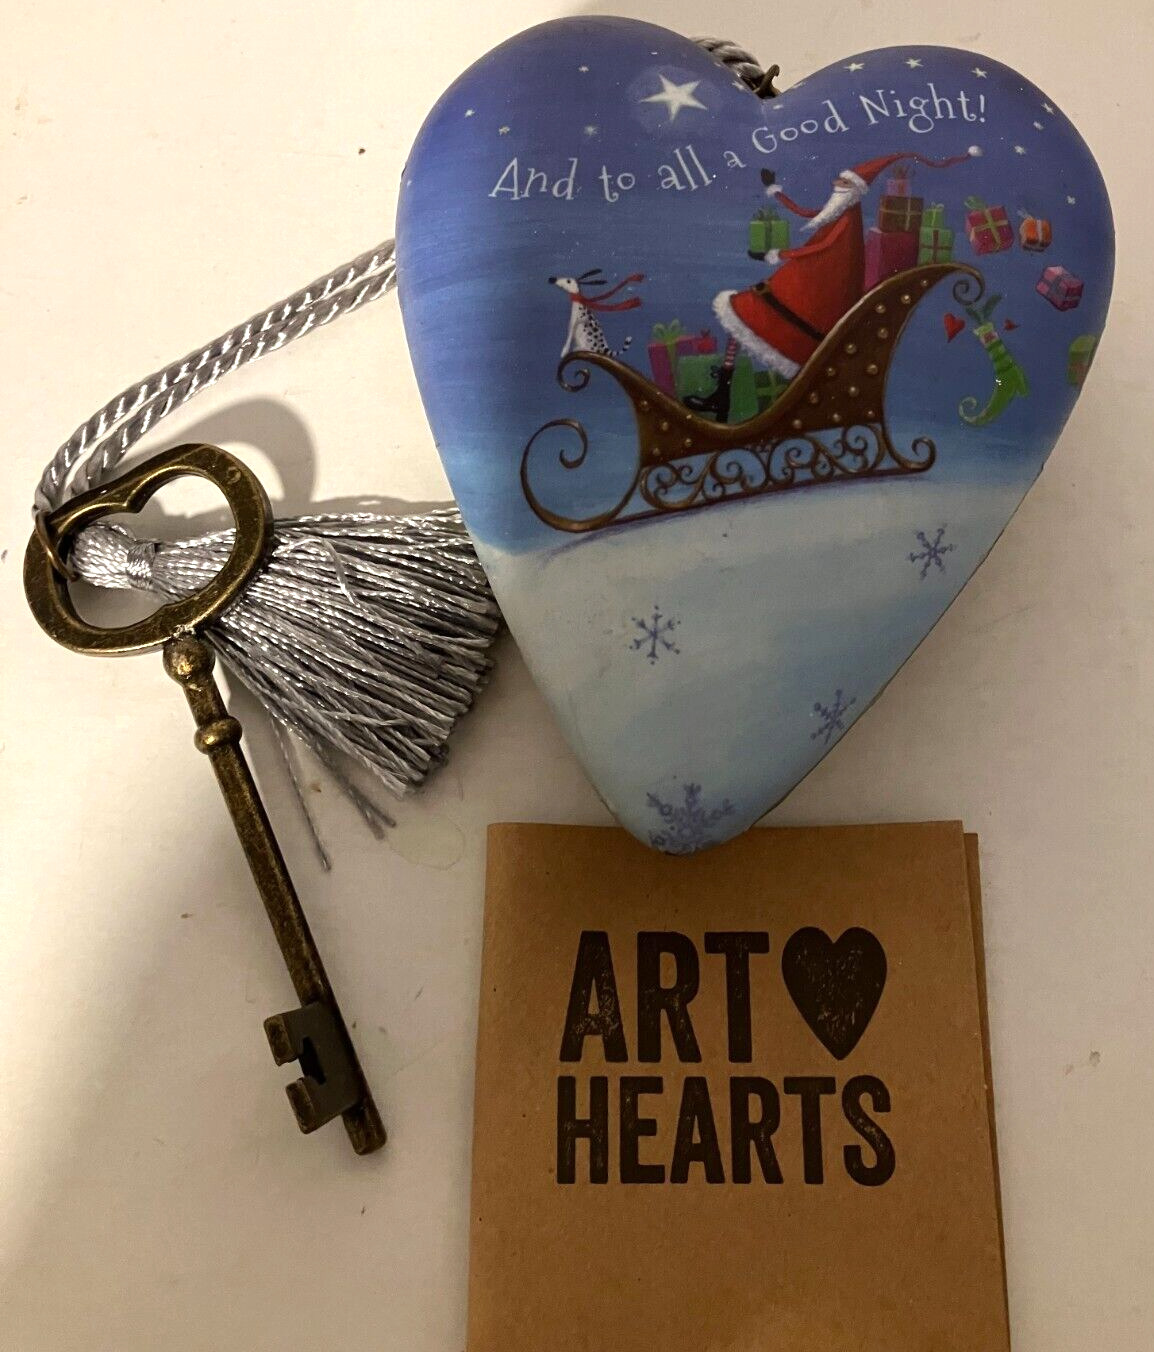 Demdaco Art Heart Christmas “And to all a good Night” Key and Tassel in Box Tags